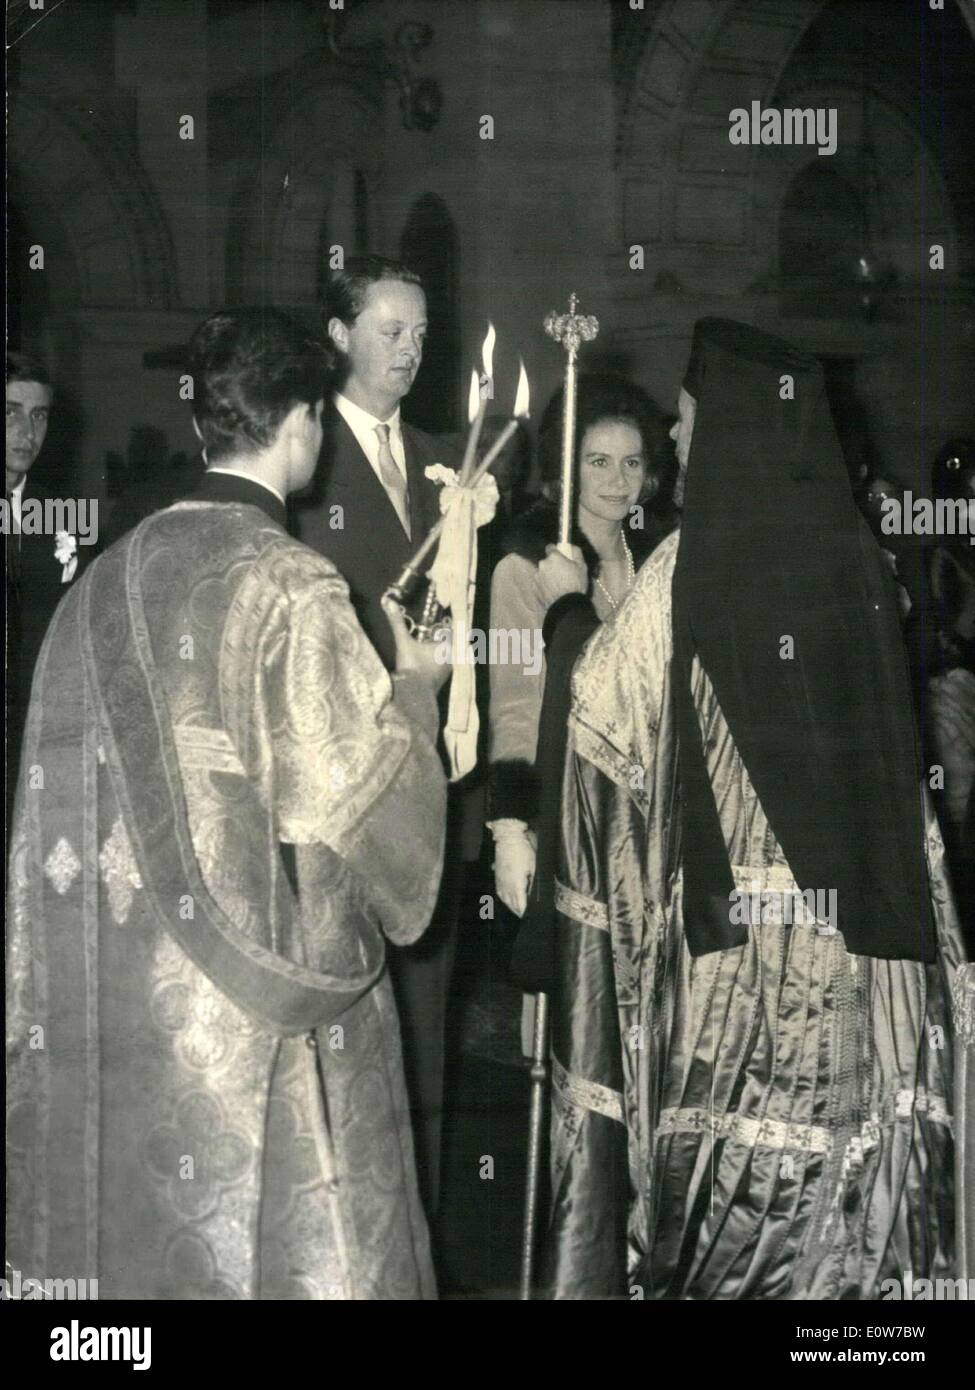 Oct. 23, 1961 - Tina ex-onassis weds Lord Blandford: Religious wedding the Greek orthodox church in Rue Georges Bizet, Paris, this afternoon. Stock Photo